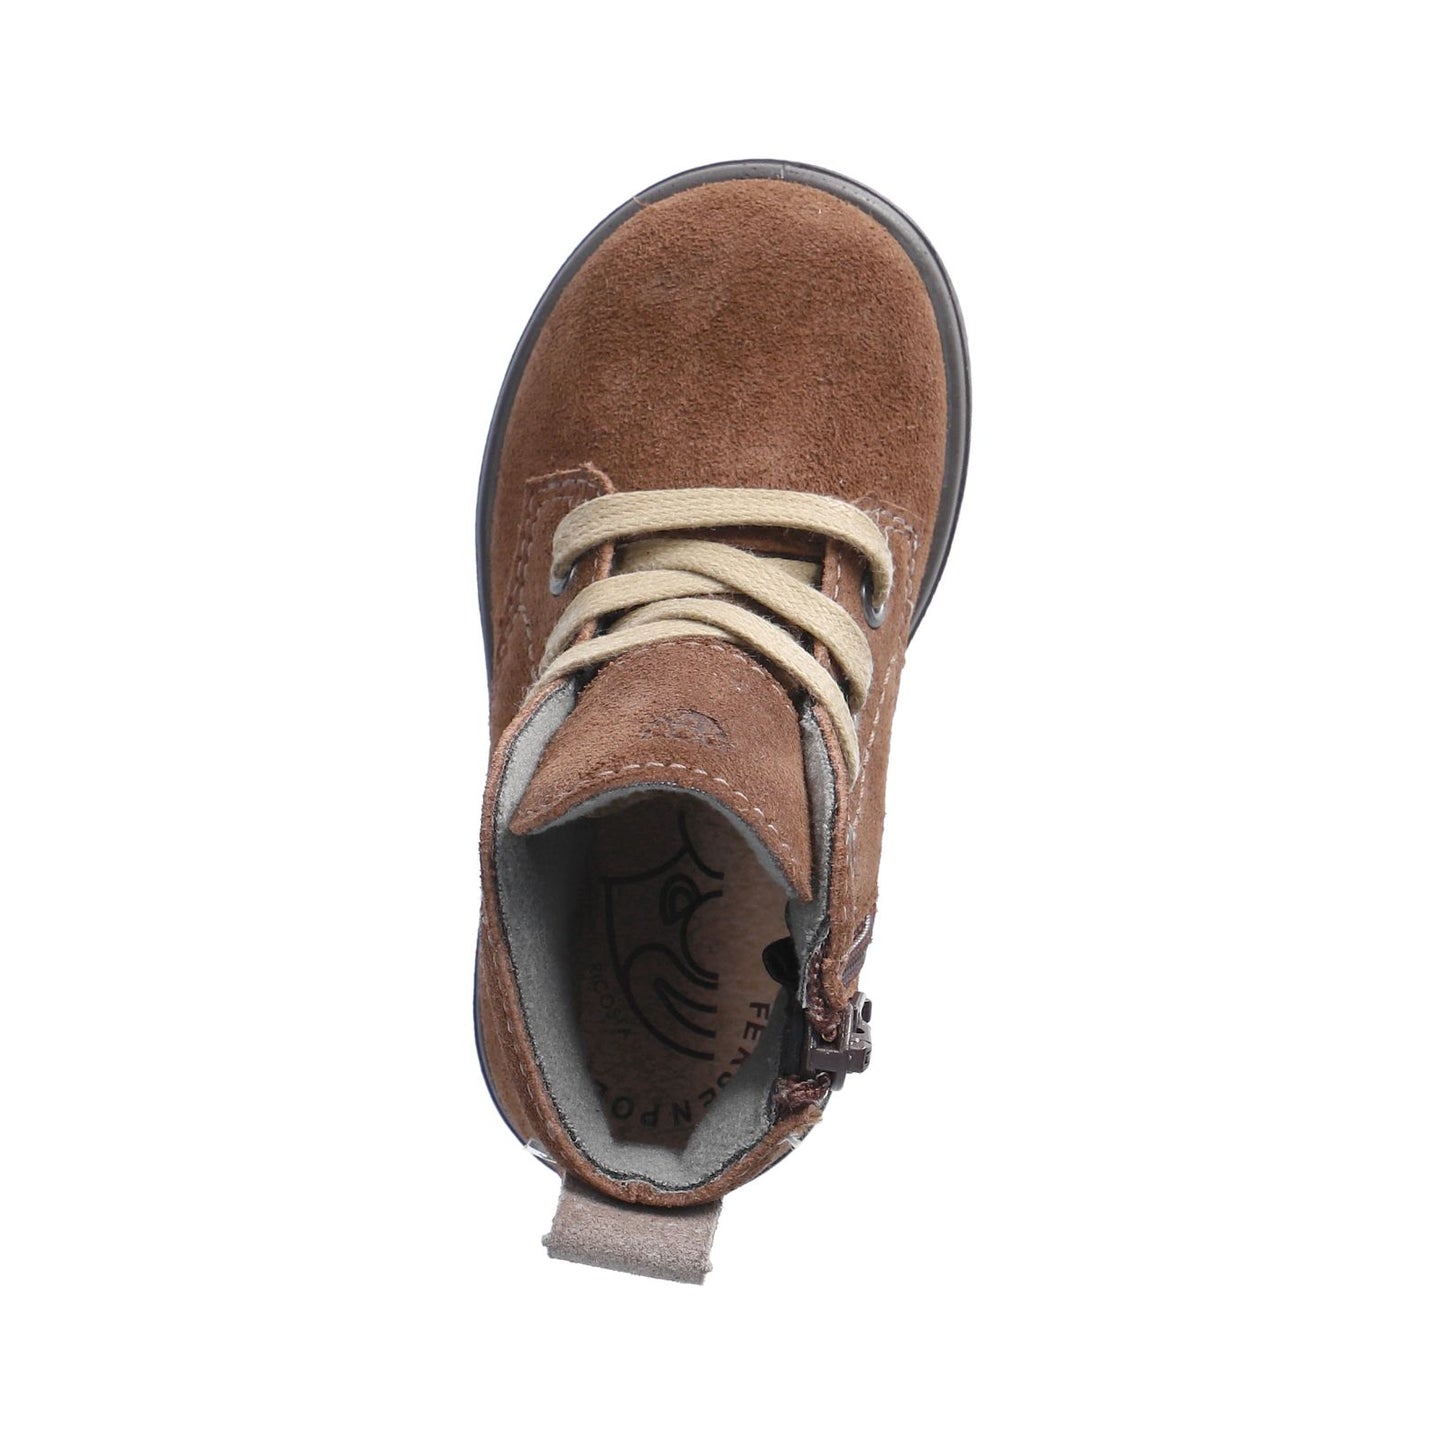 A unisex waterproof ankle boot by Ricosta, style Ilvy, in brown suede with lace and zip fastening. Above view.